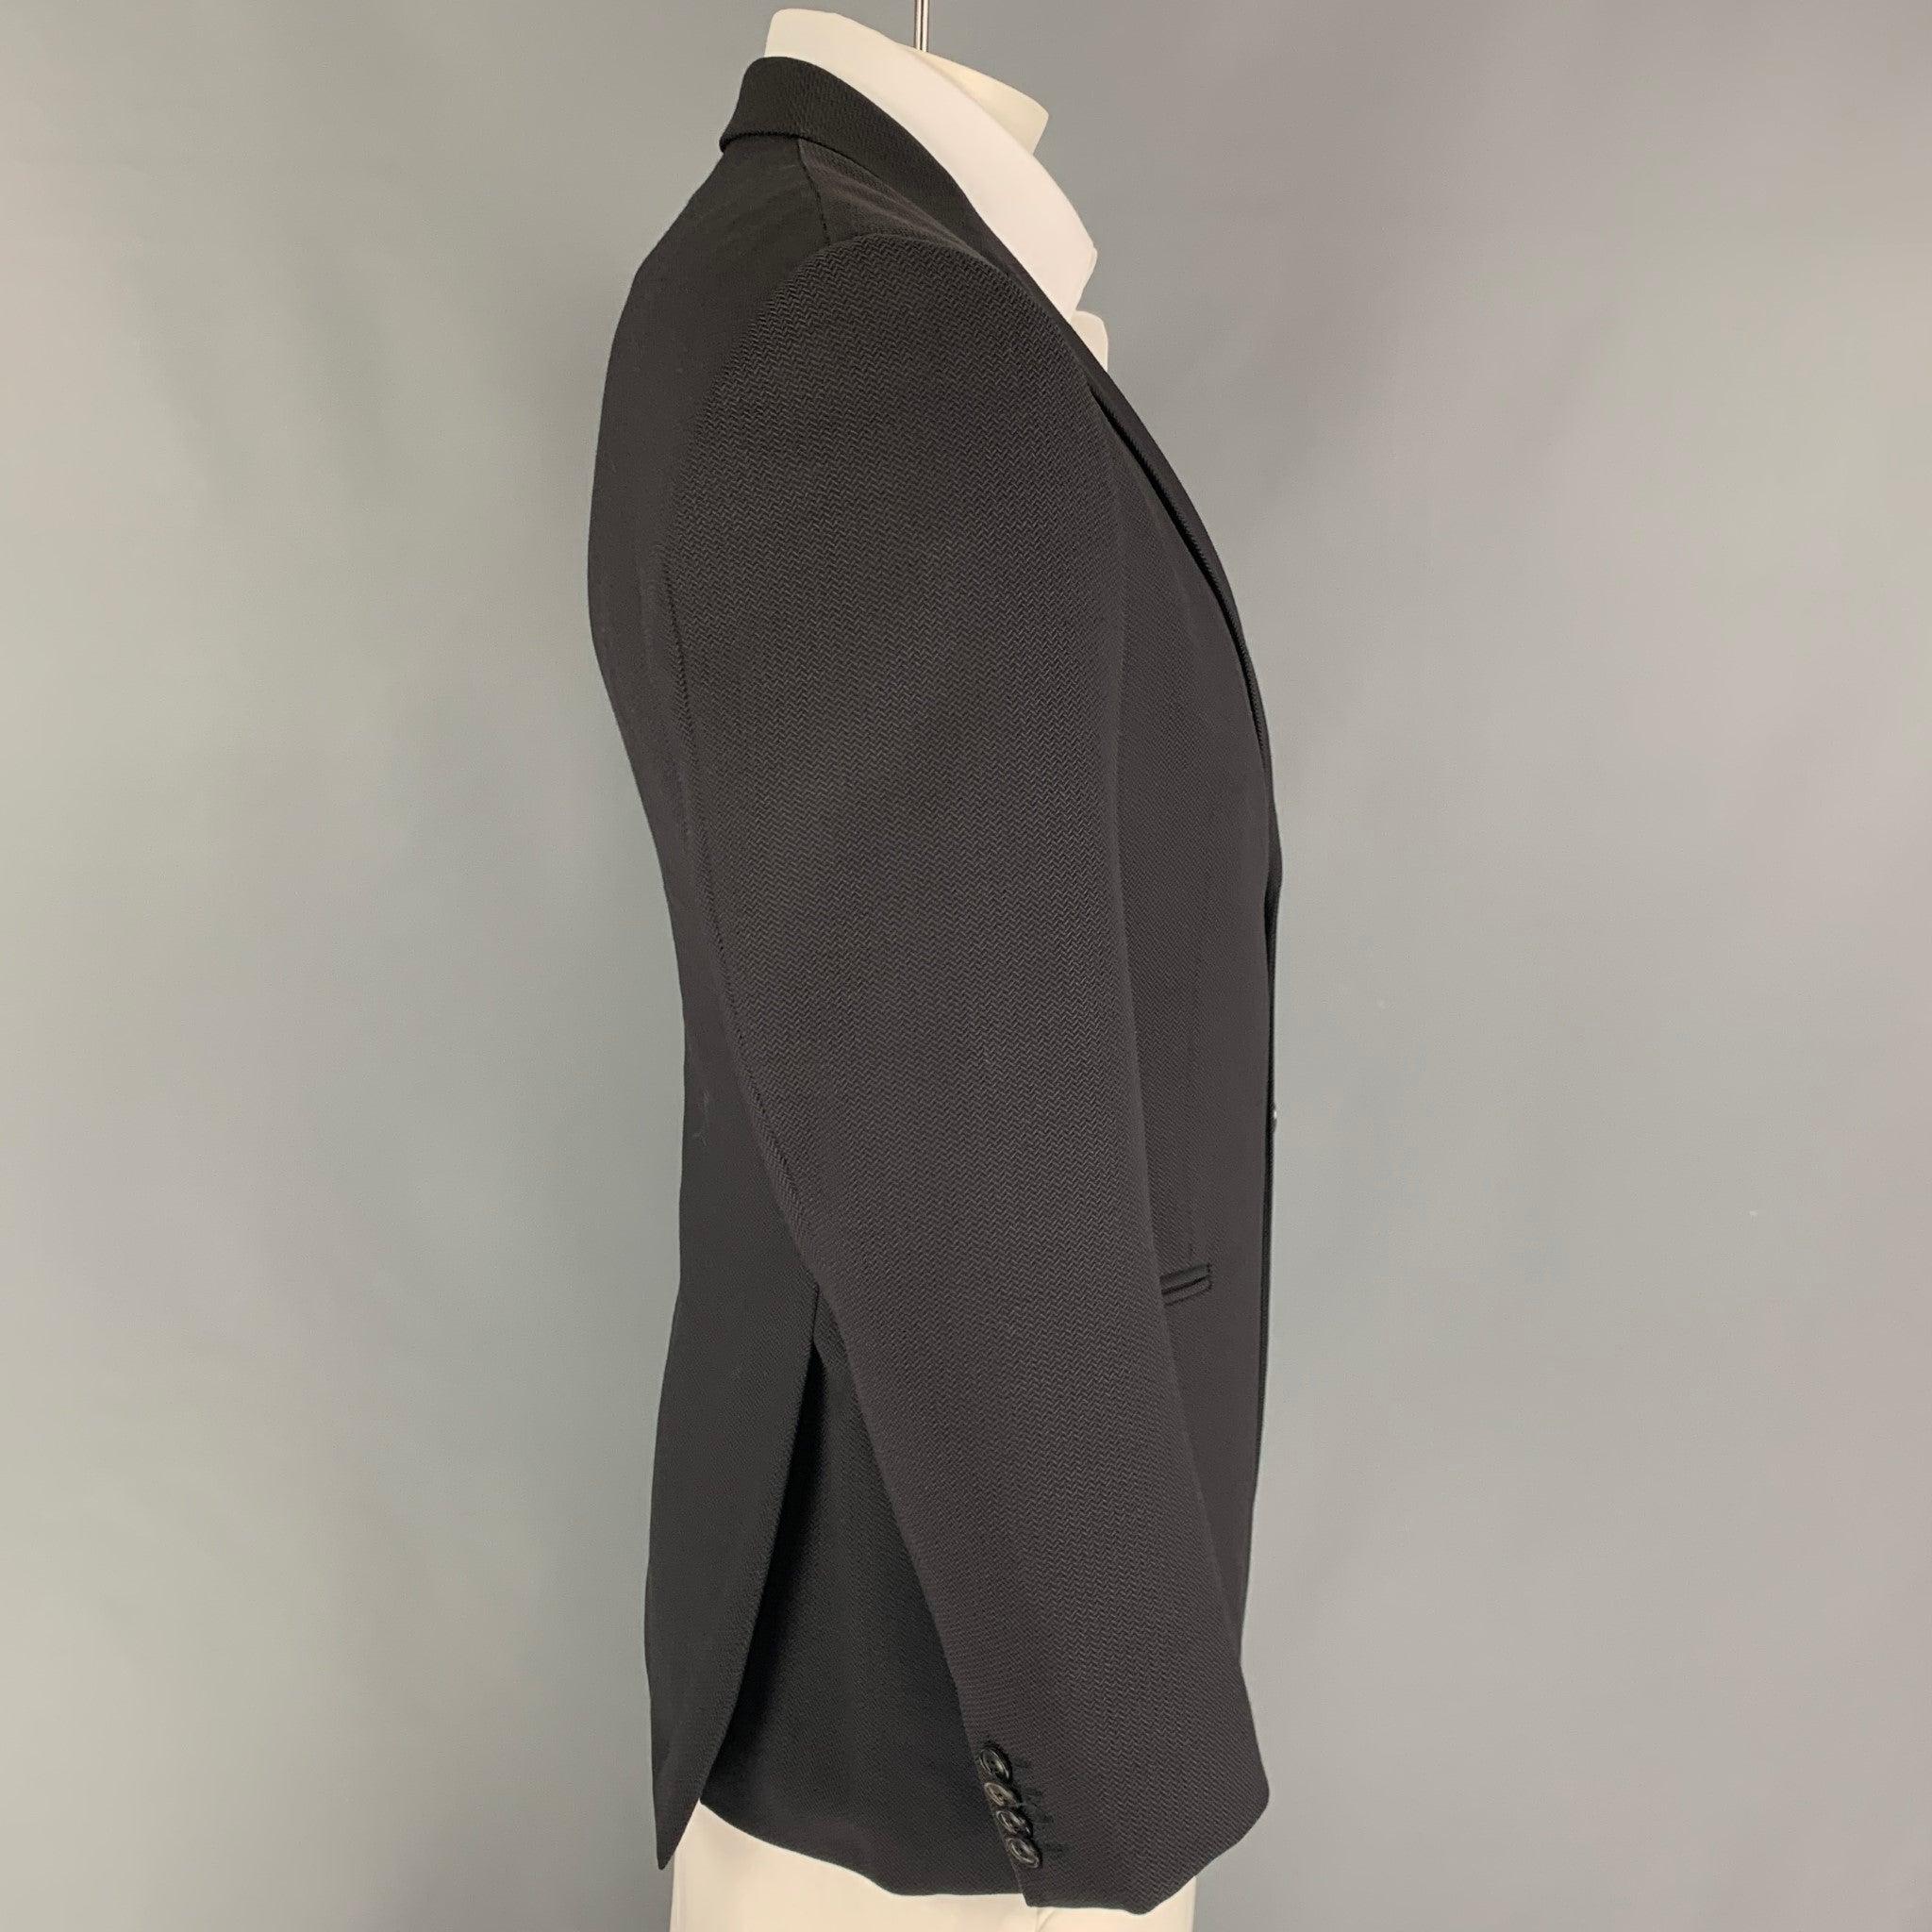 GIORGIO ARMANI sport coat comes in a black lana wool with a full liner featuring a notch lapel, slit pockets, double back vent, and a double button closure. Made in Italy.Very Good
Pre-Owned Condition. 

Marked:   50 

Measurements: 
 
Shoulder: 18